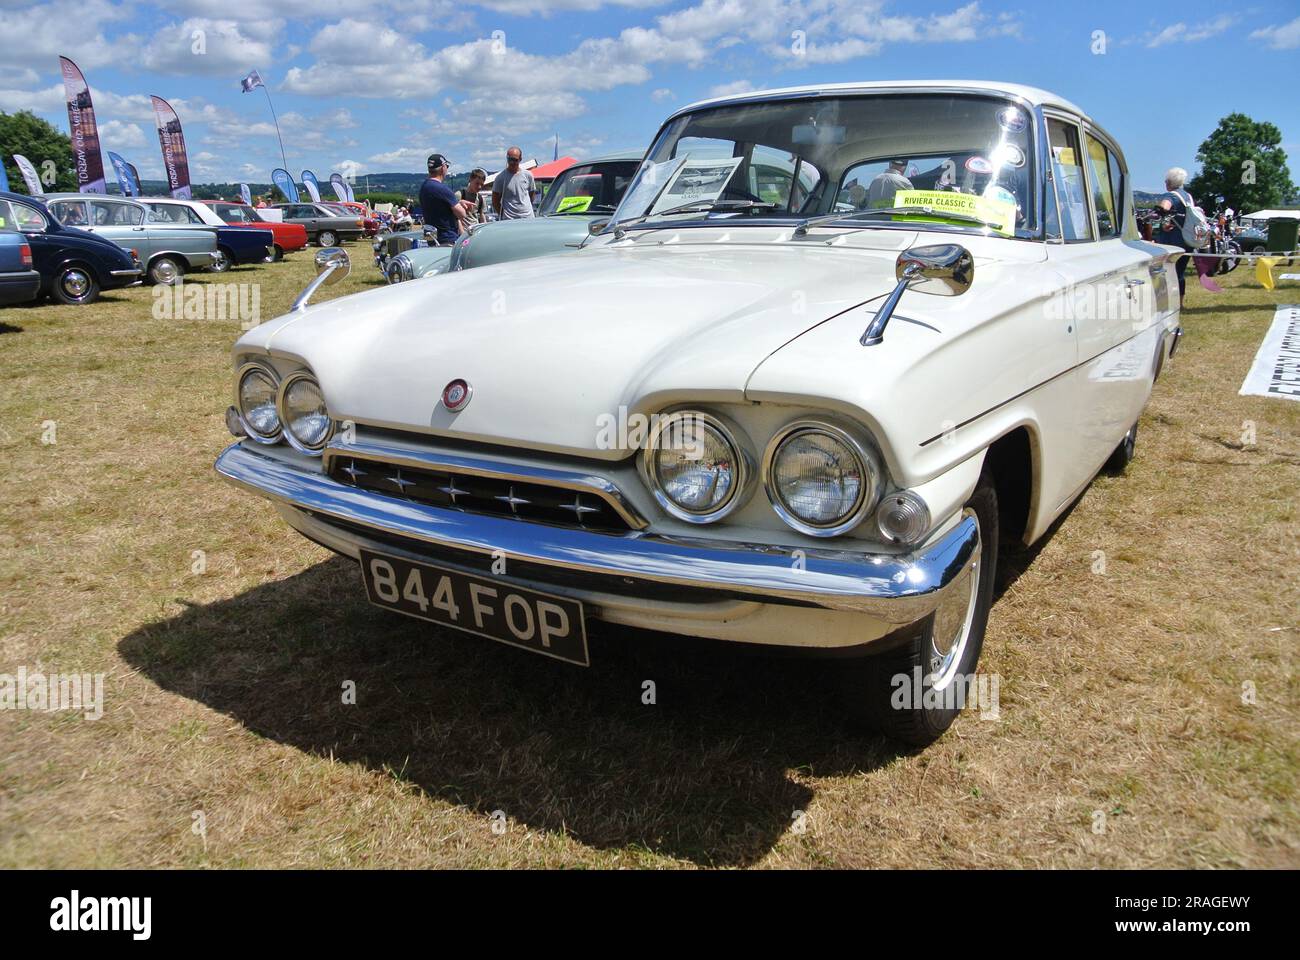 A 1962 Ford Consul Classic car parked up on display at the 47th Historic Vehicle Gathering, Powderham, Devon, England, Uk. Stock Photo